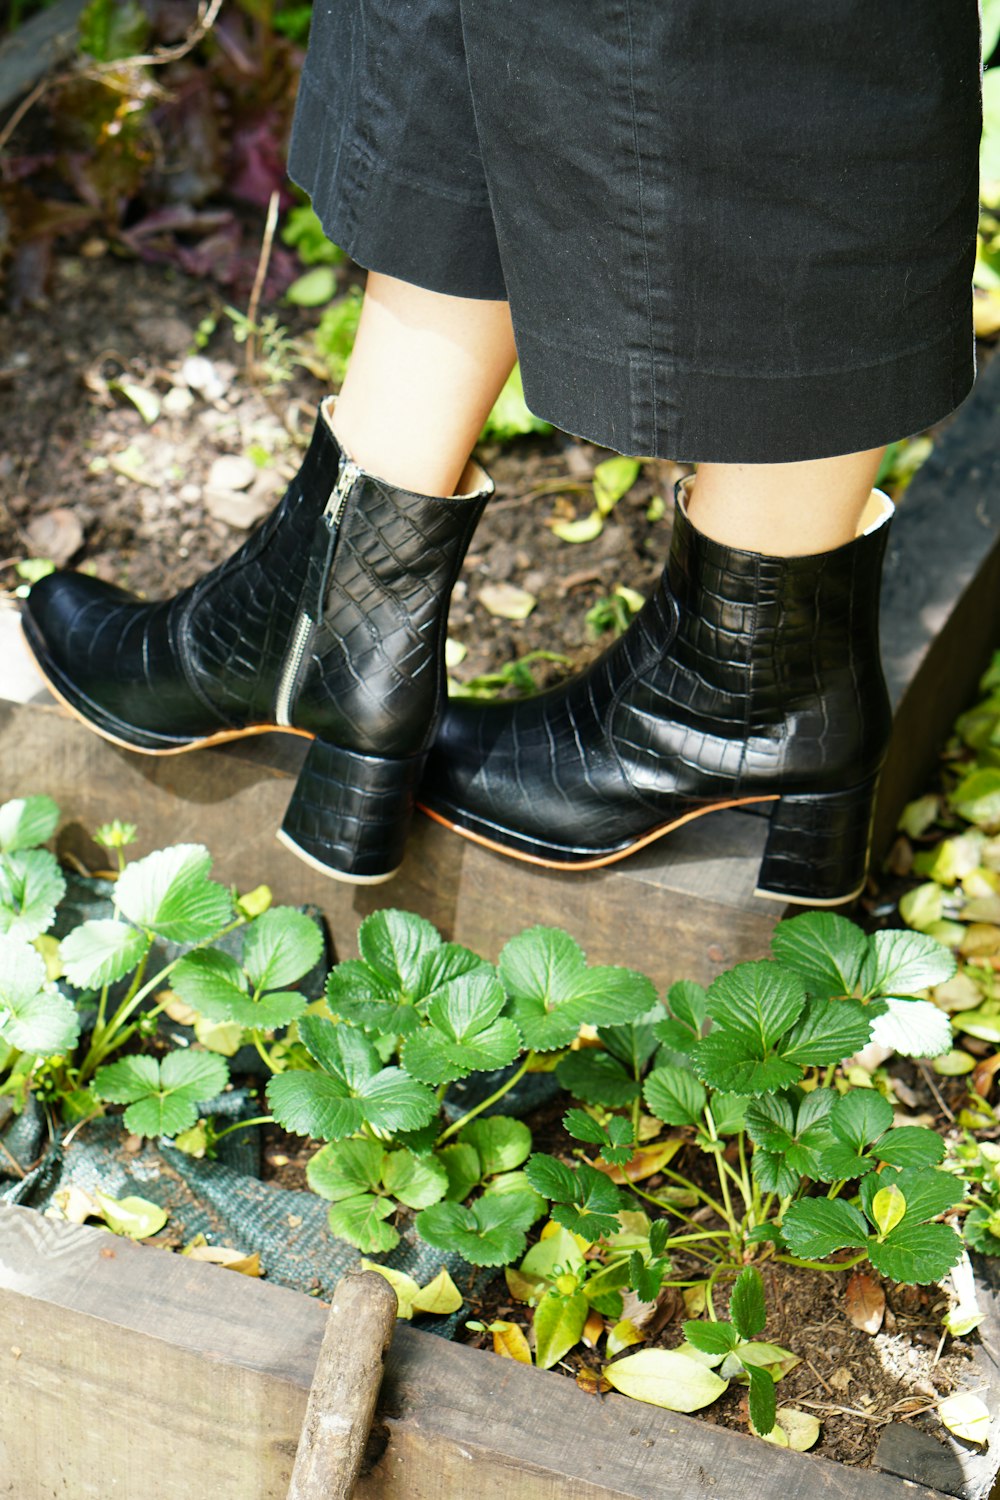 person wearing black leather boots standing on green leaves